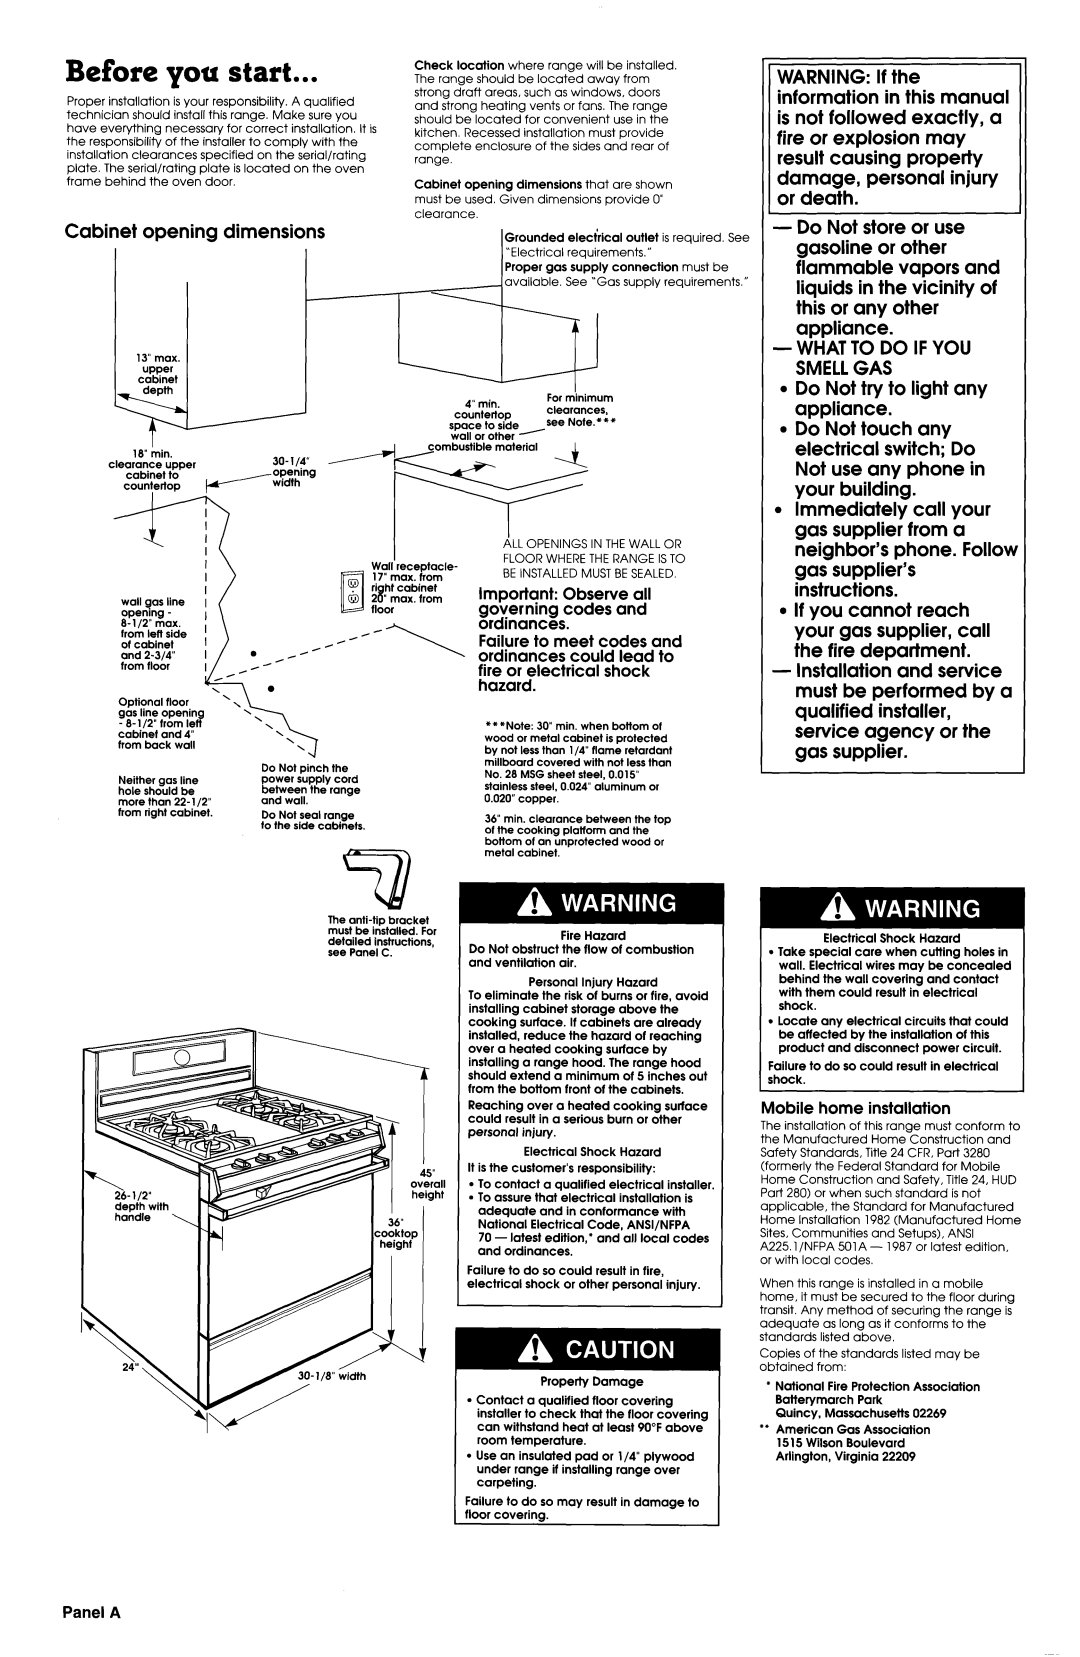 Whirlpool SF388PEWN0 Before you start, Cabinet opening, dimensions, Whatto Do If You Smellgas, l Do Not try to light any 